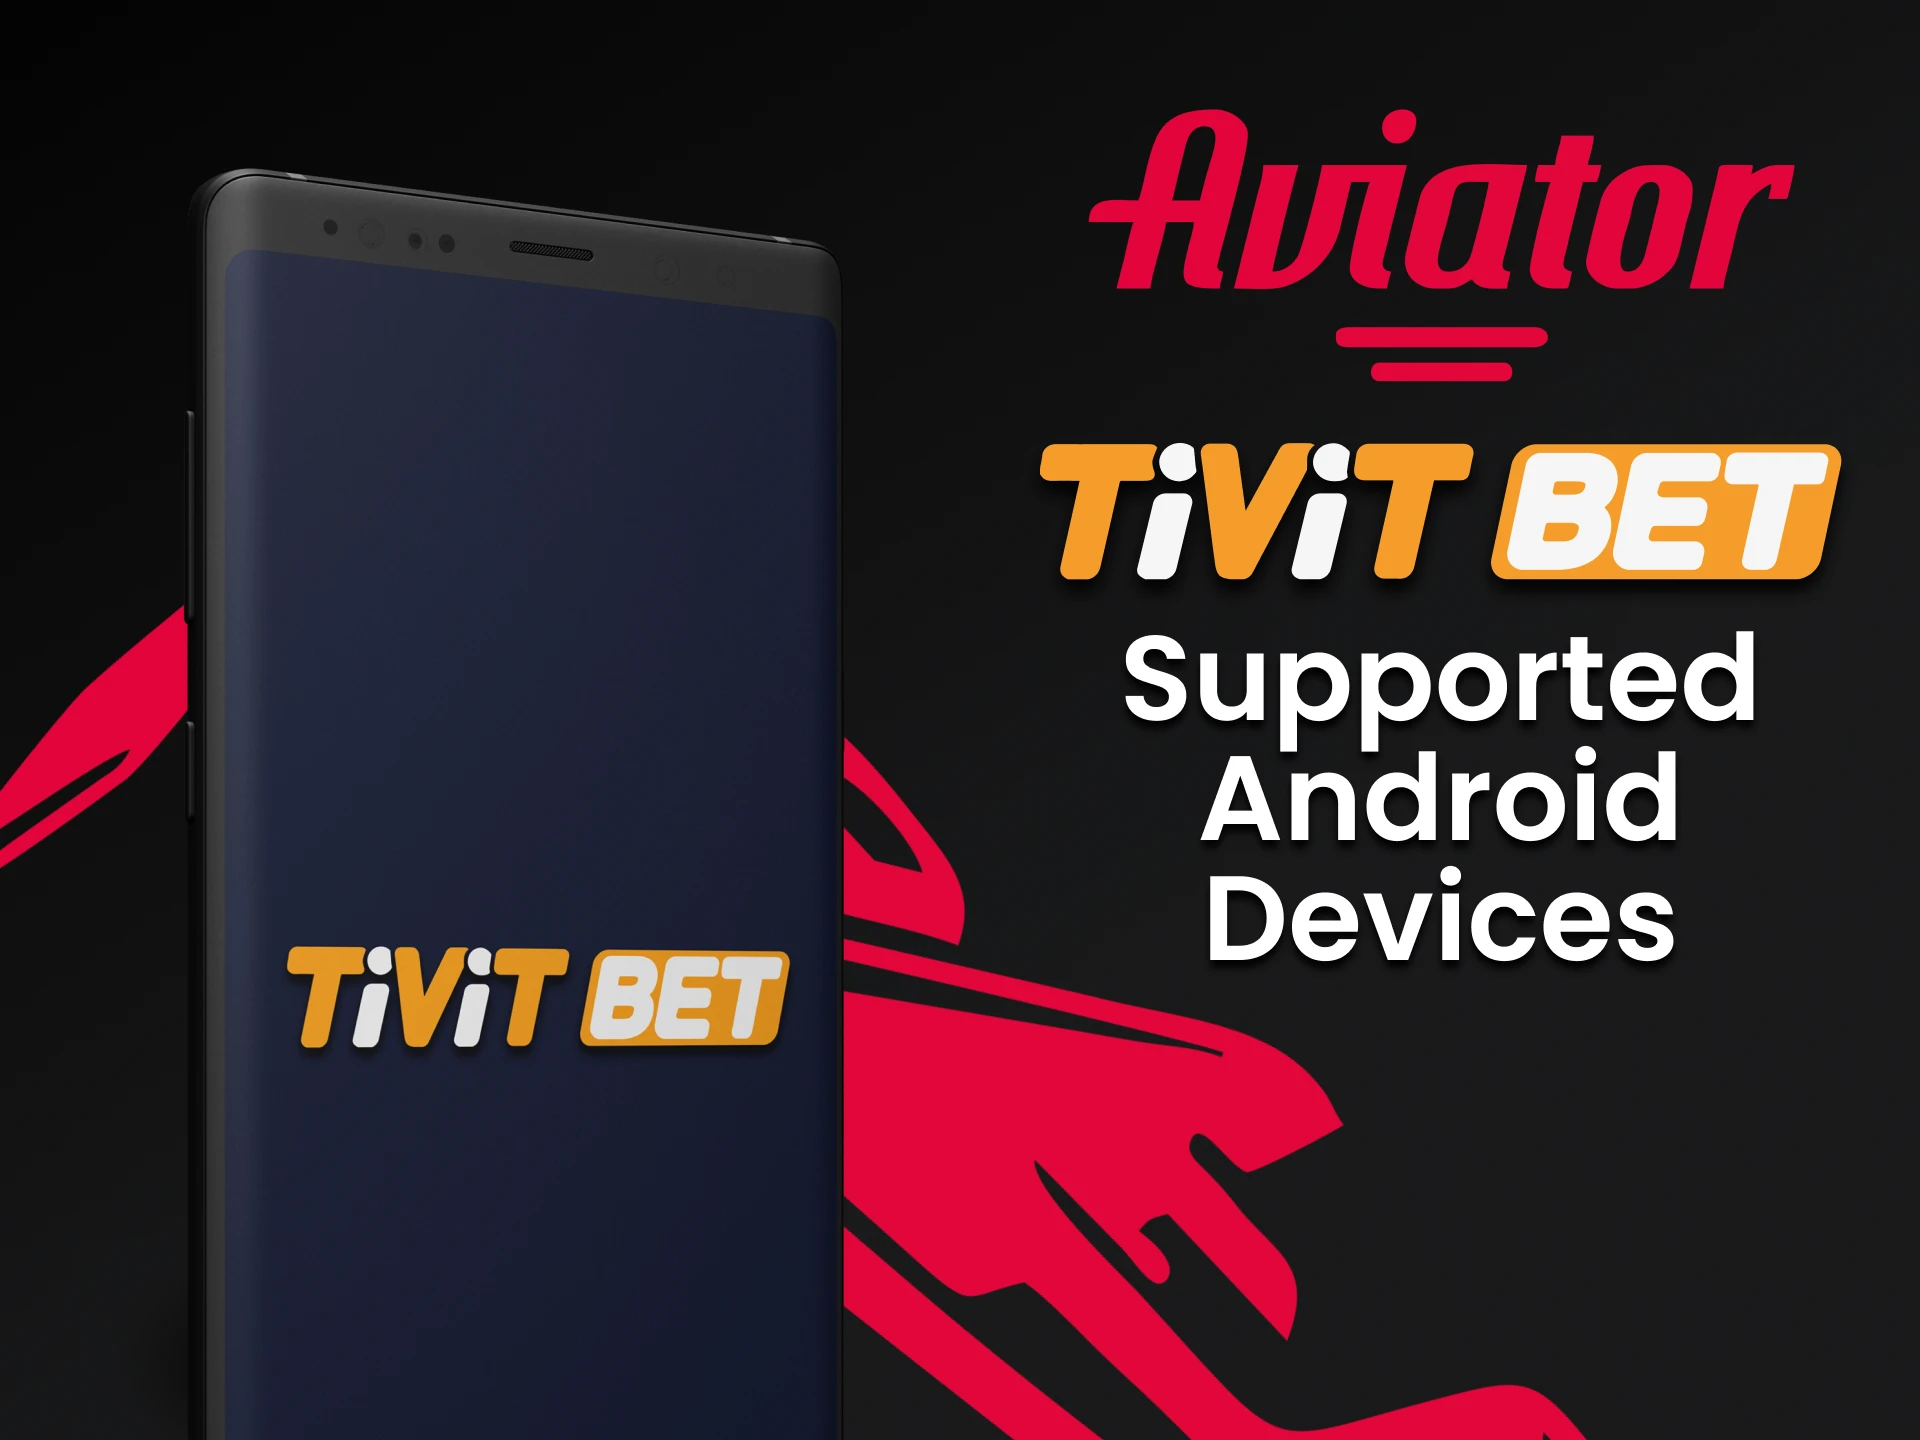 Choose Android devices to play Aviator in the Tivitbet app.